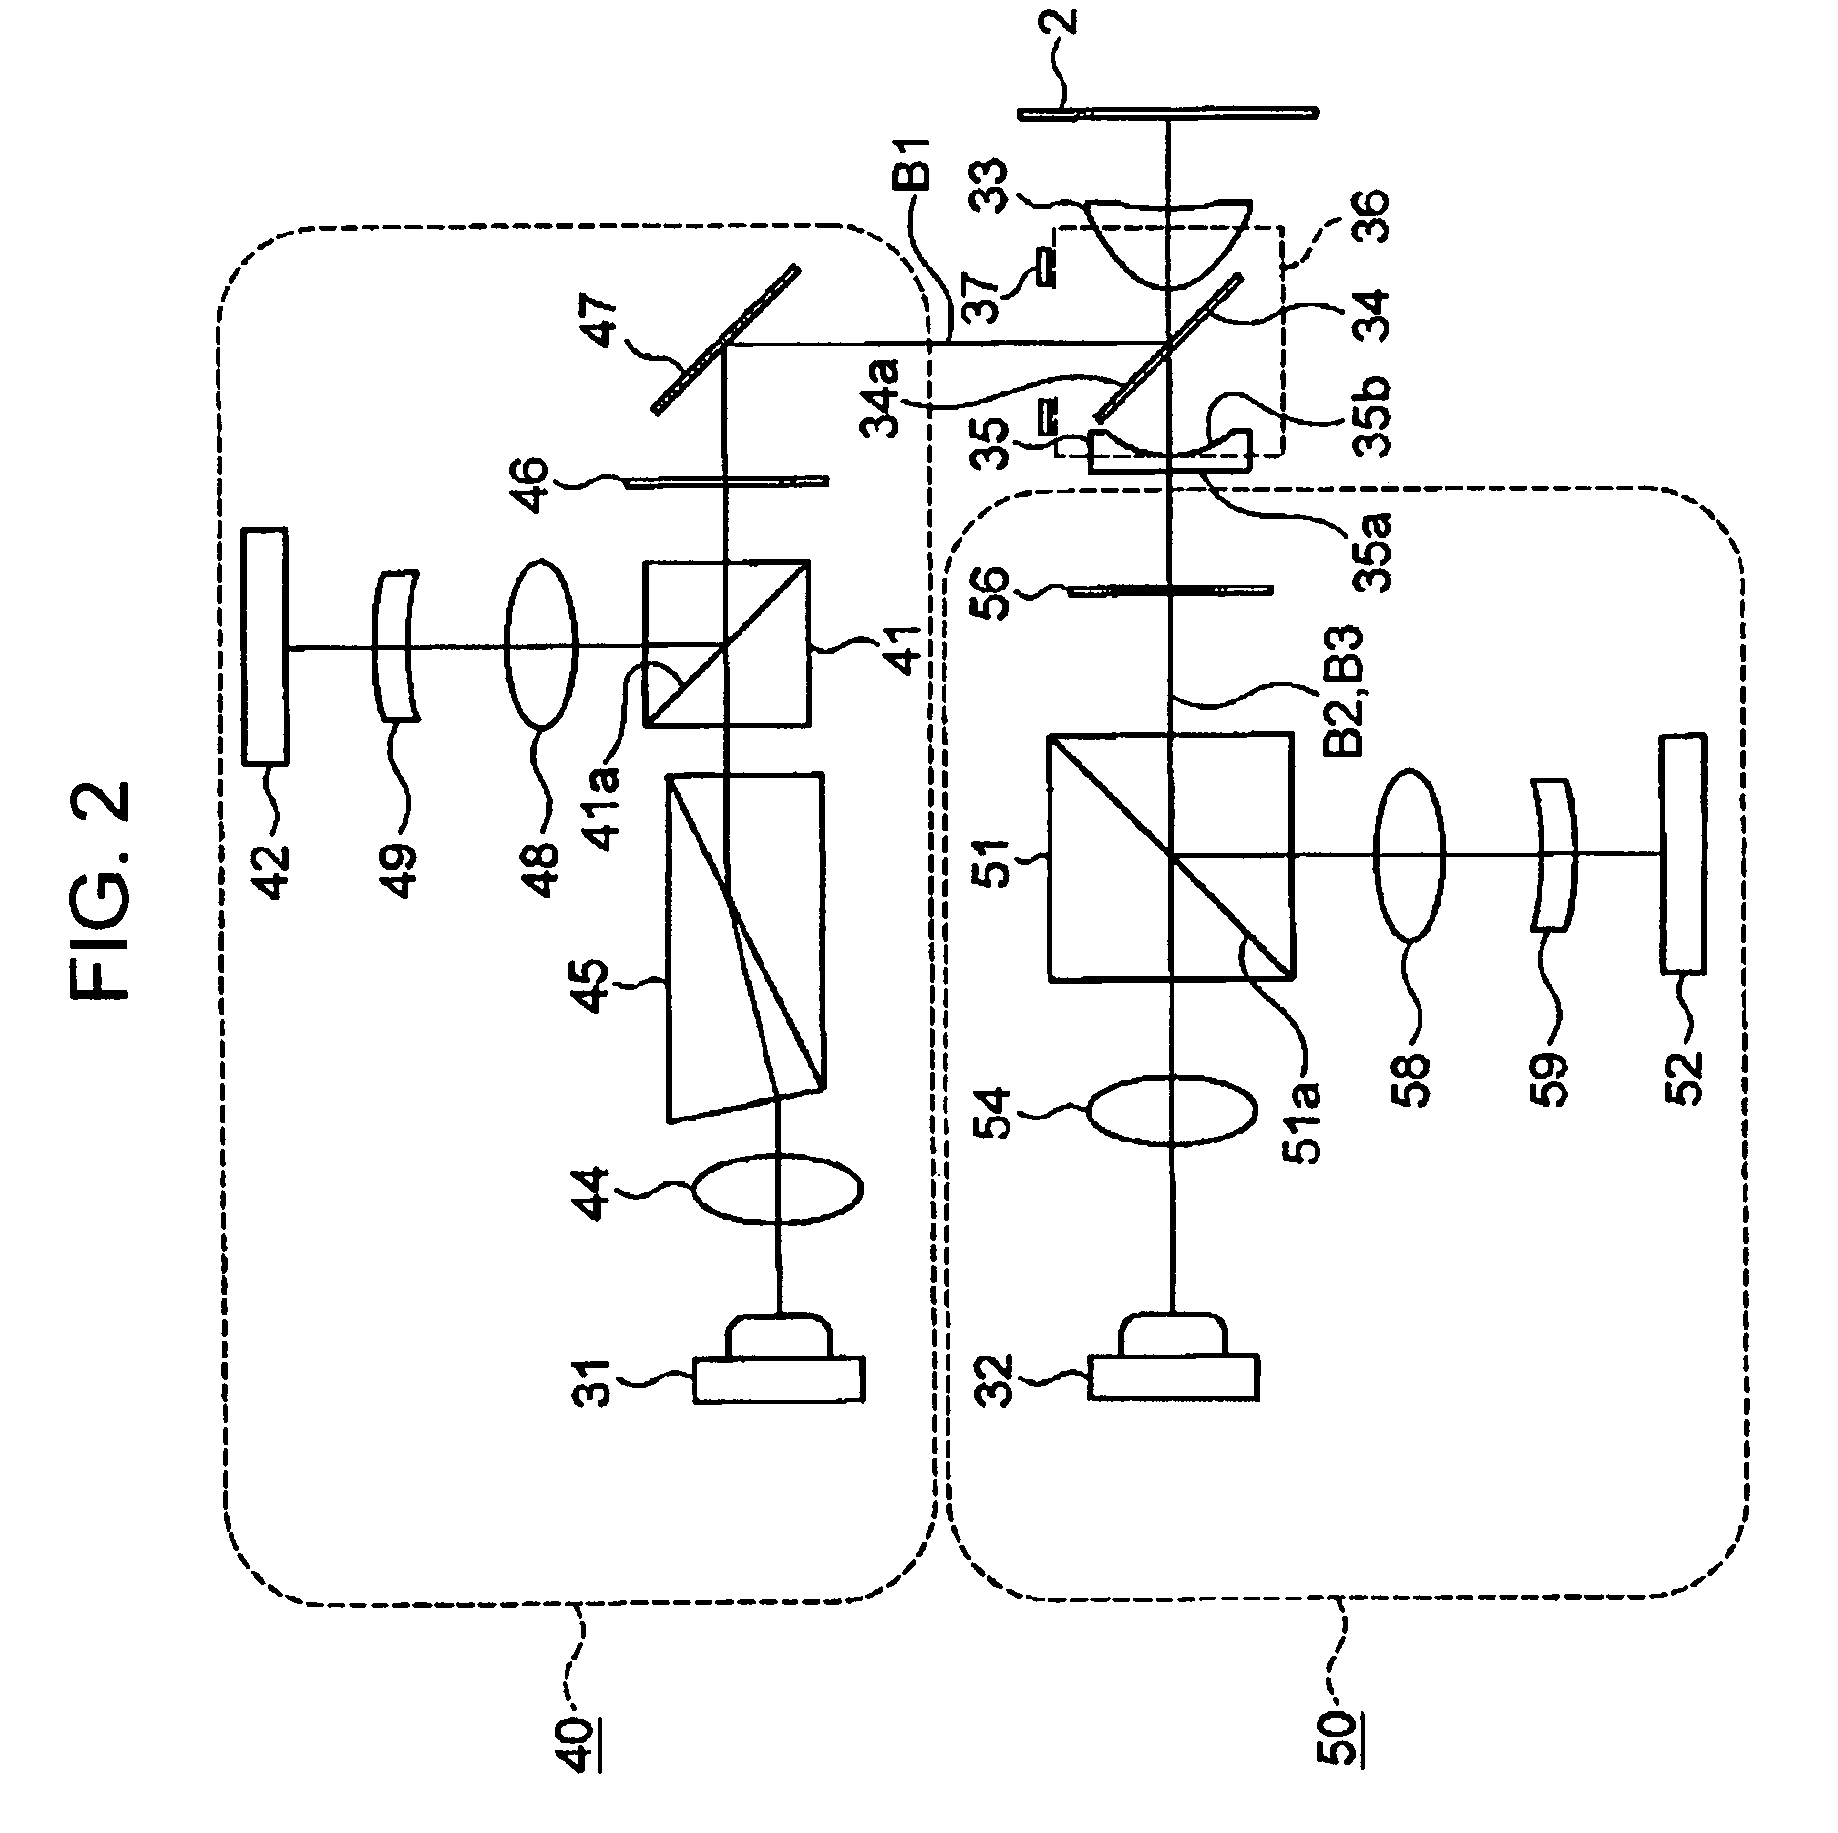 Optical pickup with beam generating and focusing